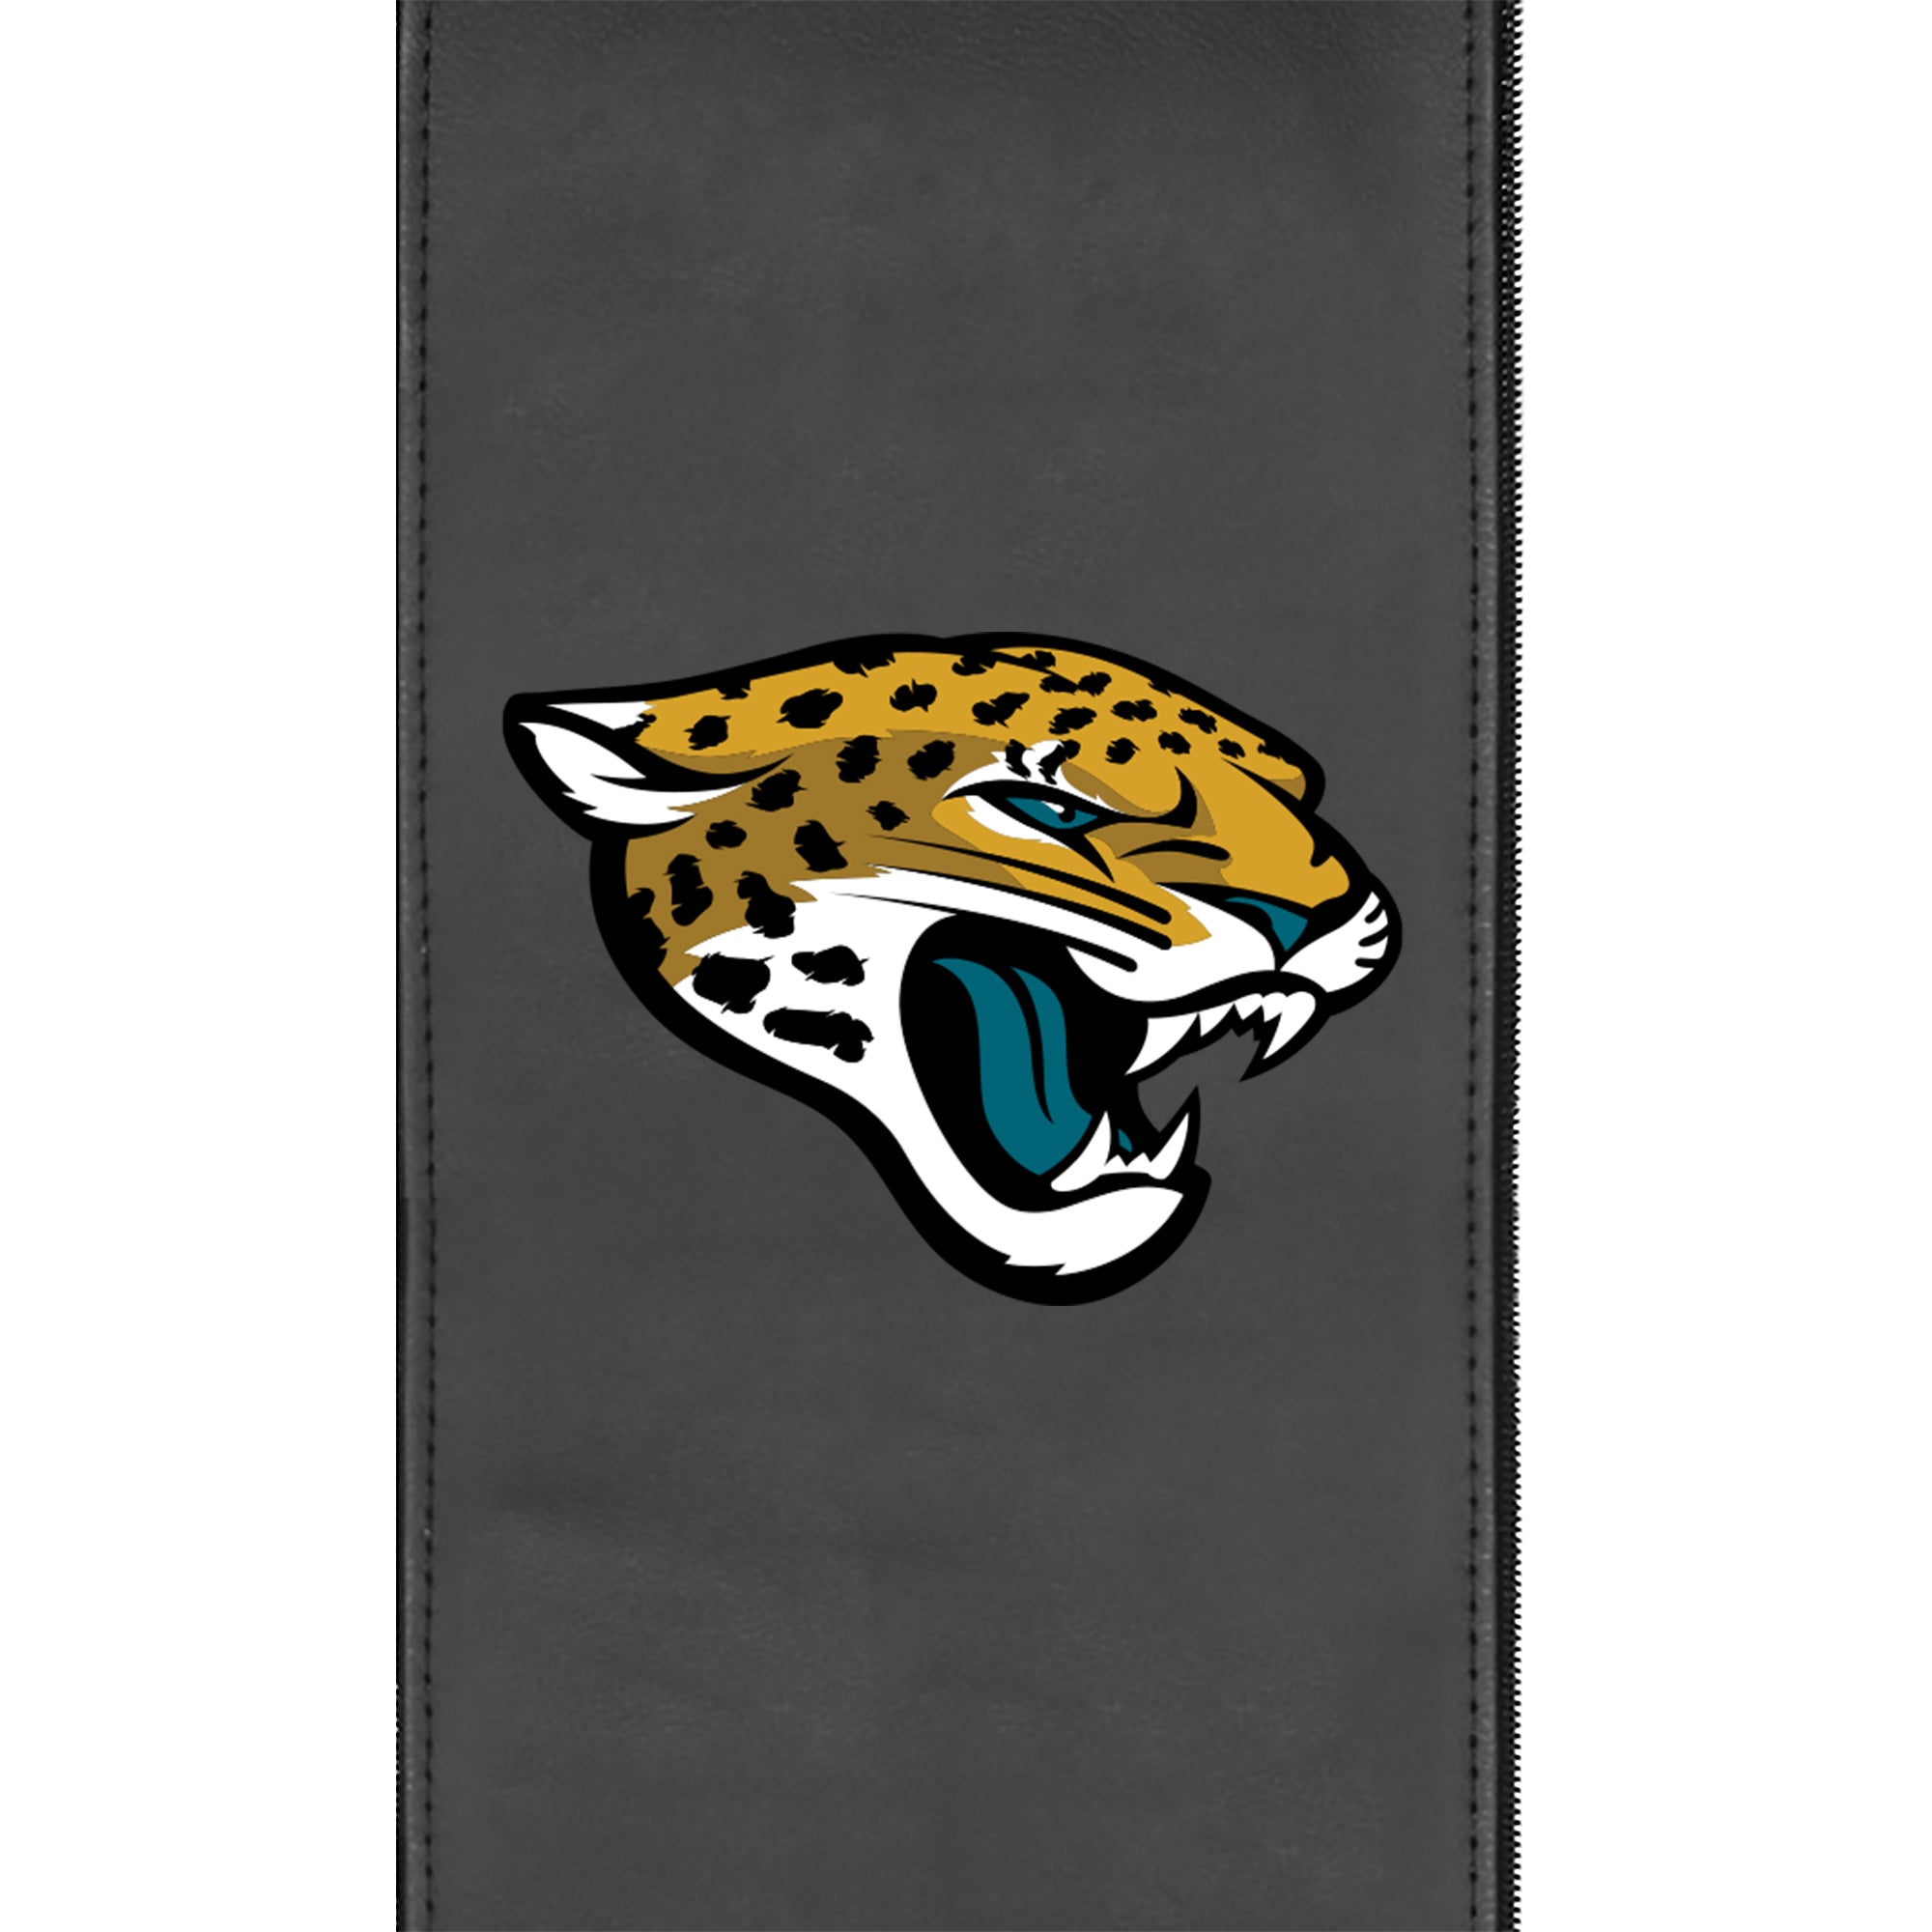 Xpression Pro Gaming Chair with  Jacksonville Jaguars Primary Logo